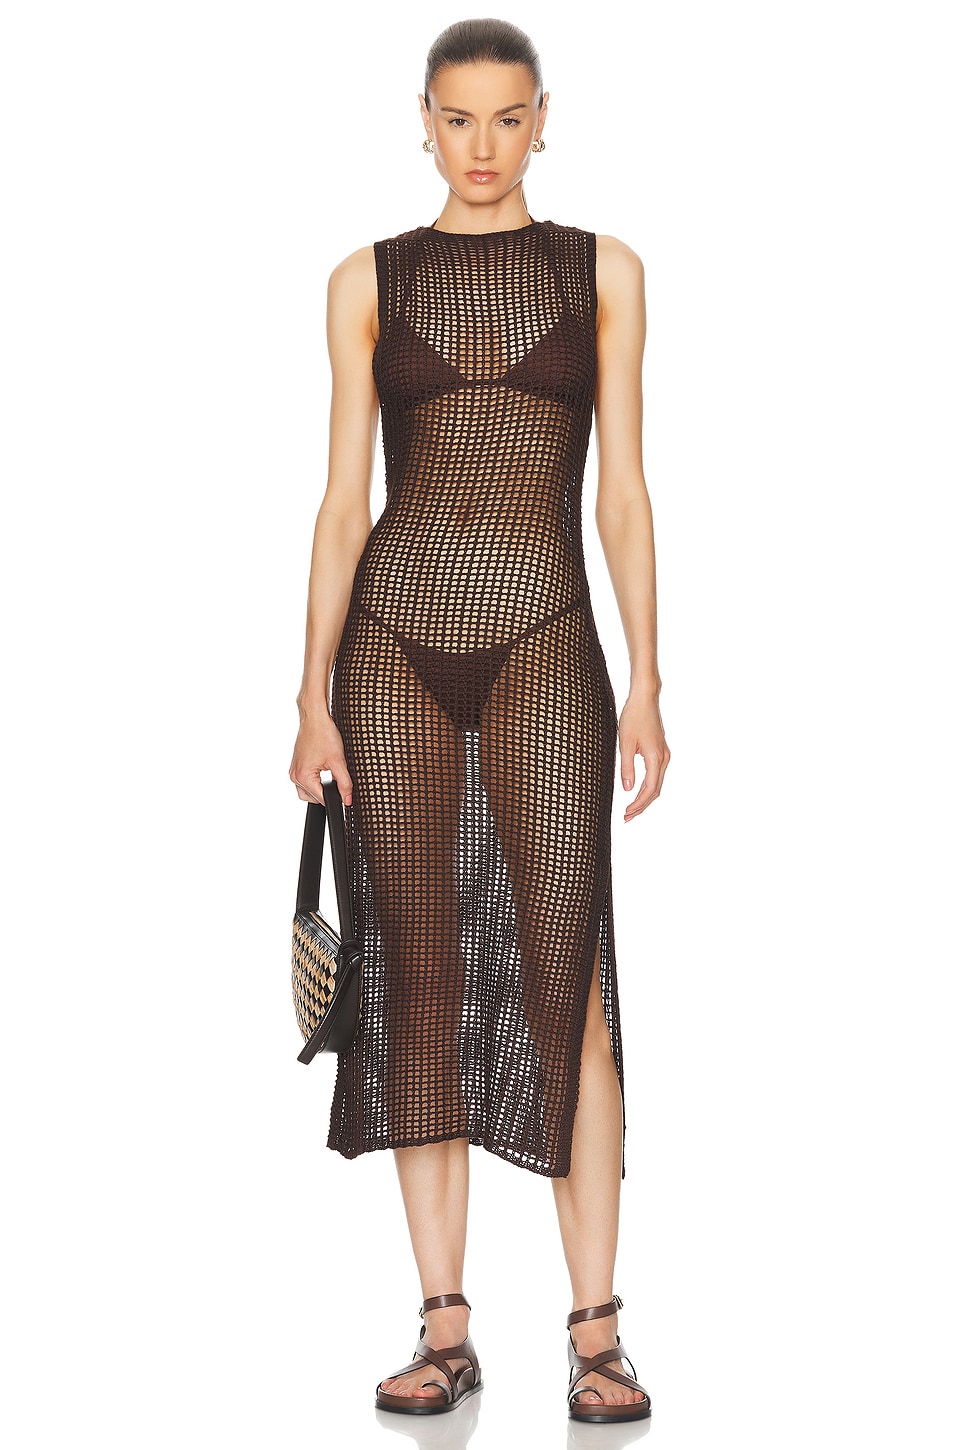 Image 1 of HAIGHT. Luciana Dress in Brauna Brown